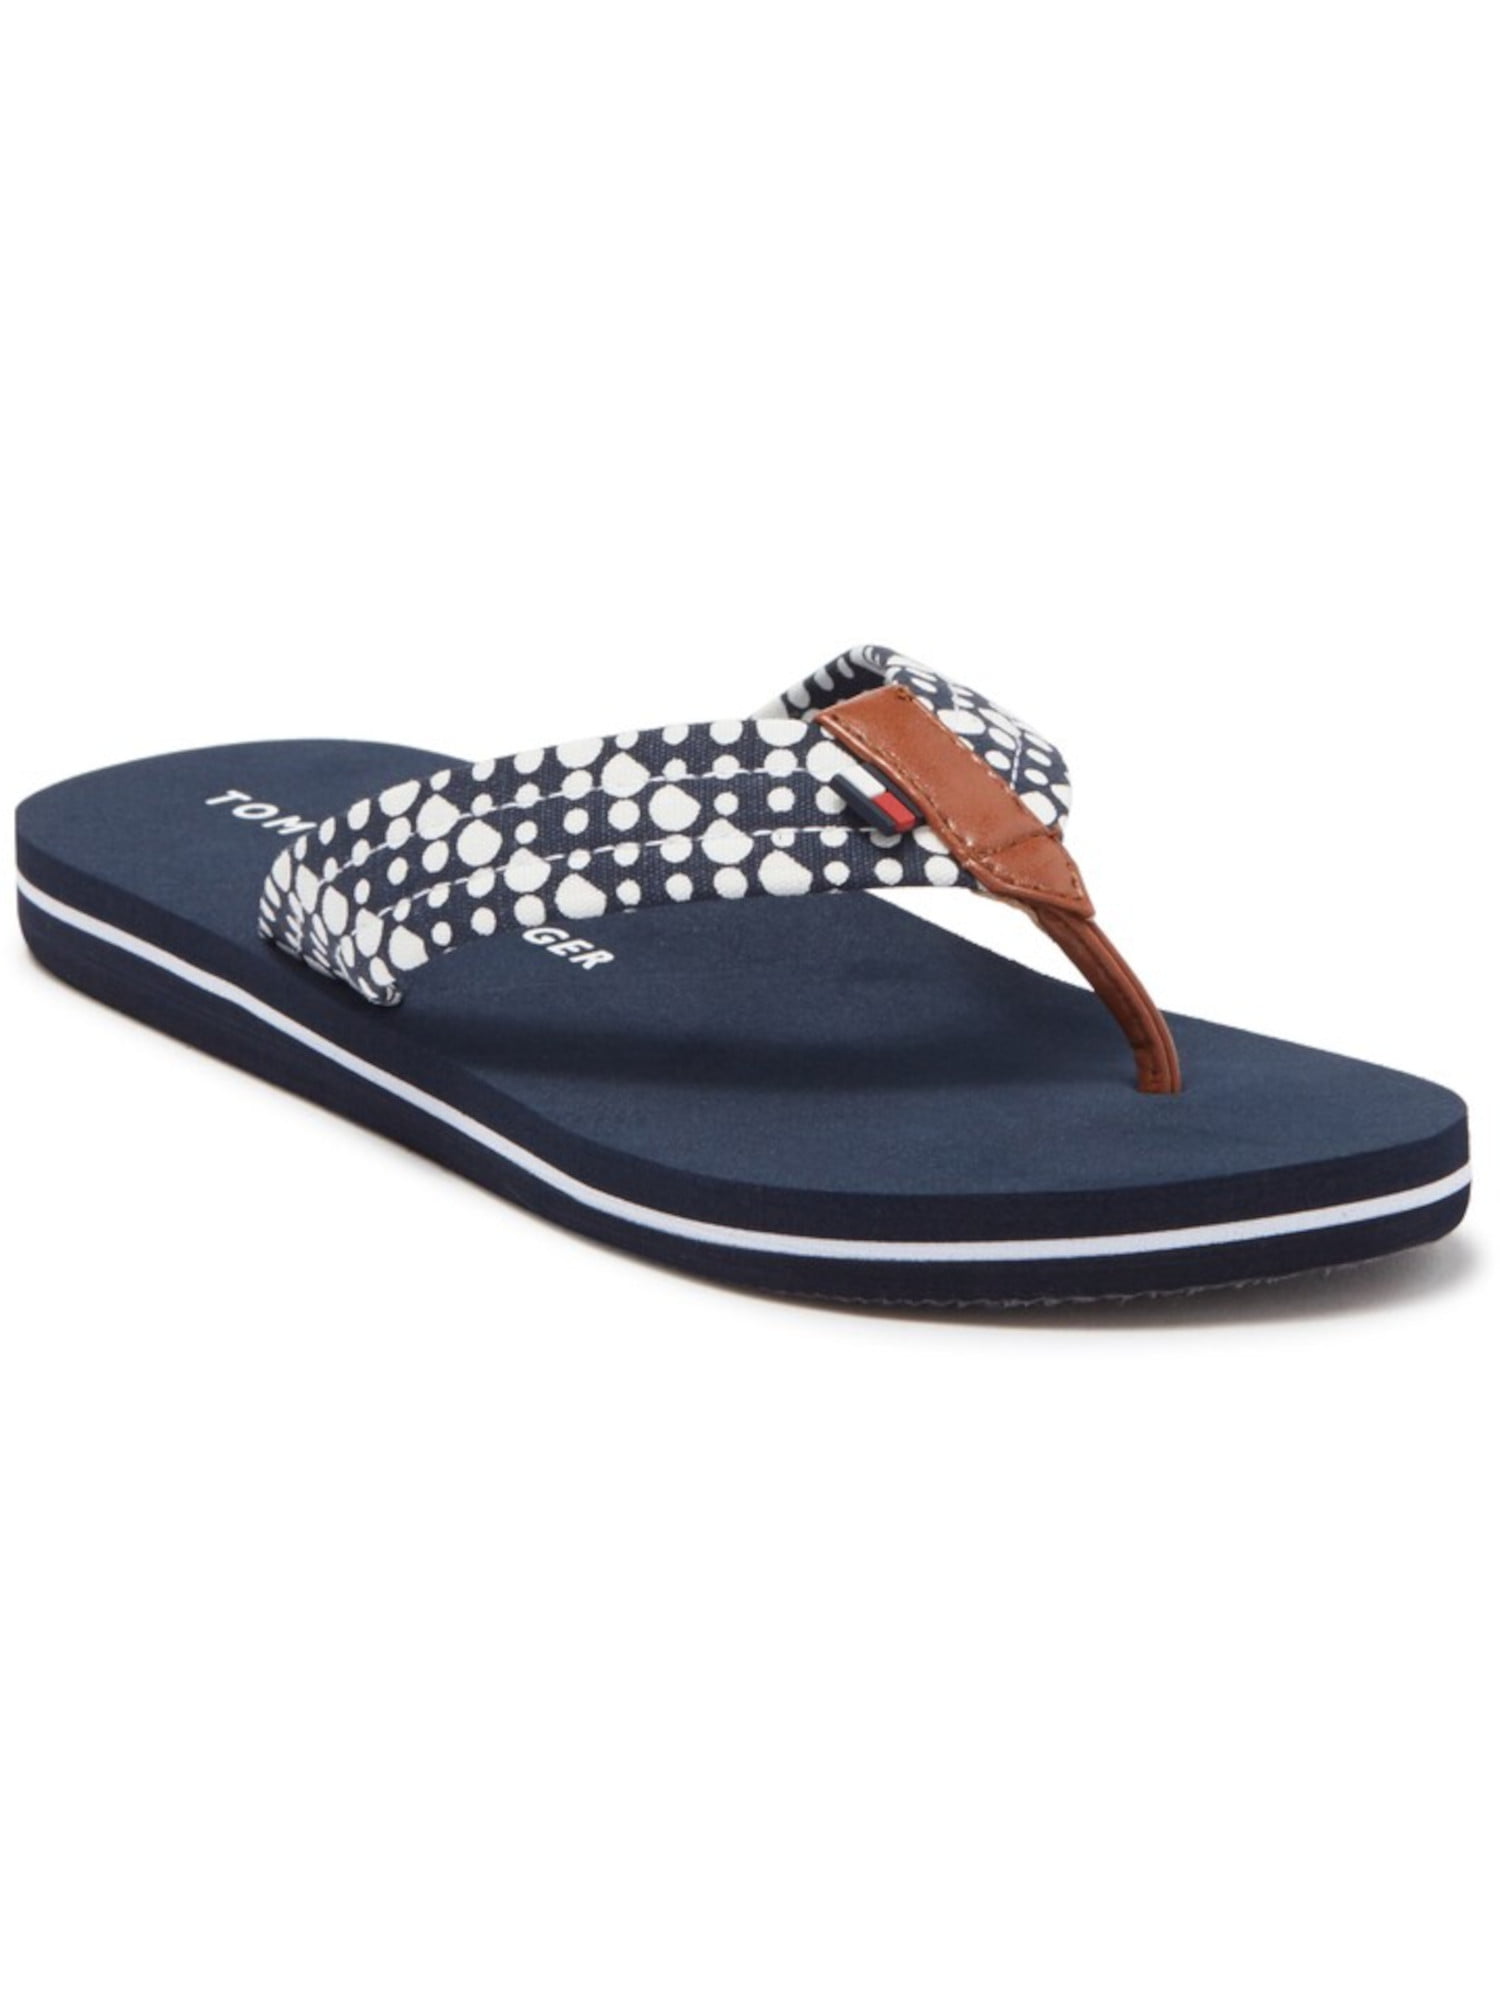 TOMMY HILFIGER Womens Navy Polka Dot Comfort Chaise Round Toe Wedge ...